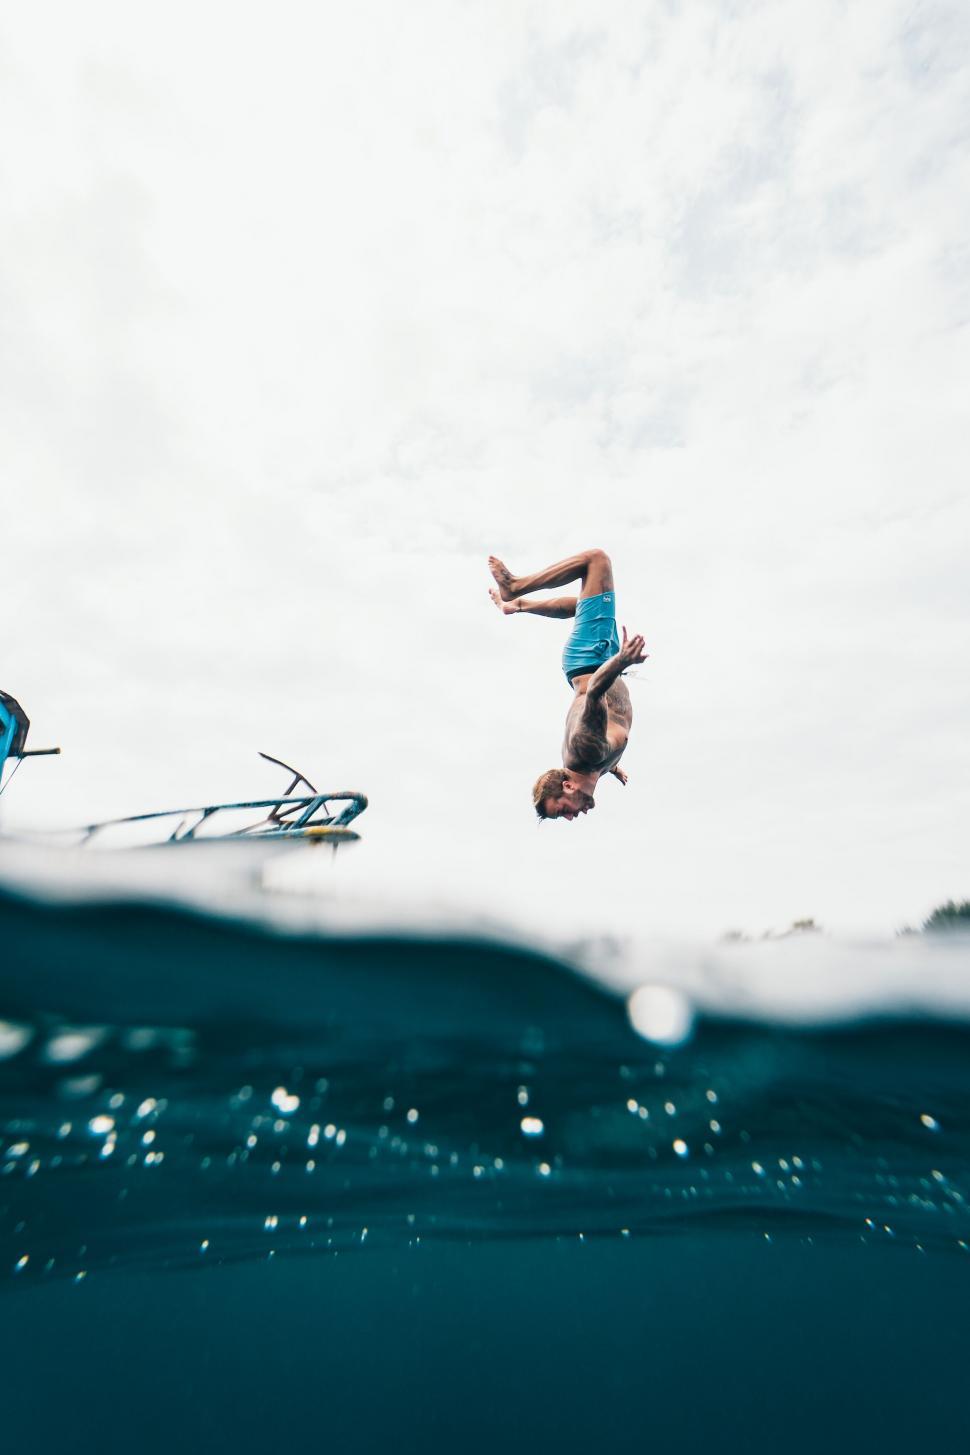 Free Image of Person flipping into water from boat 